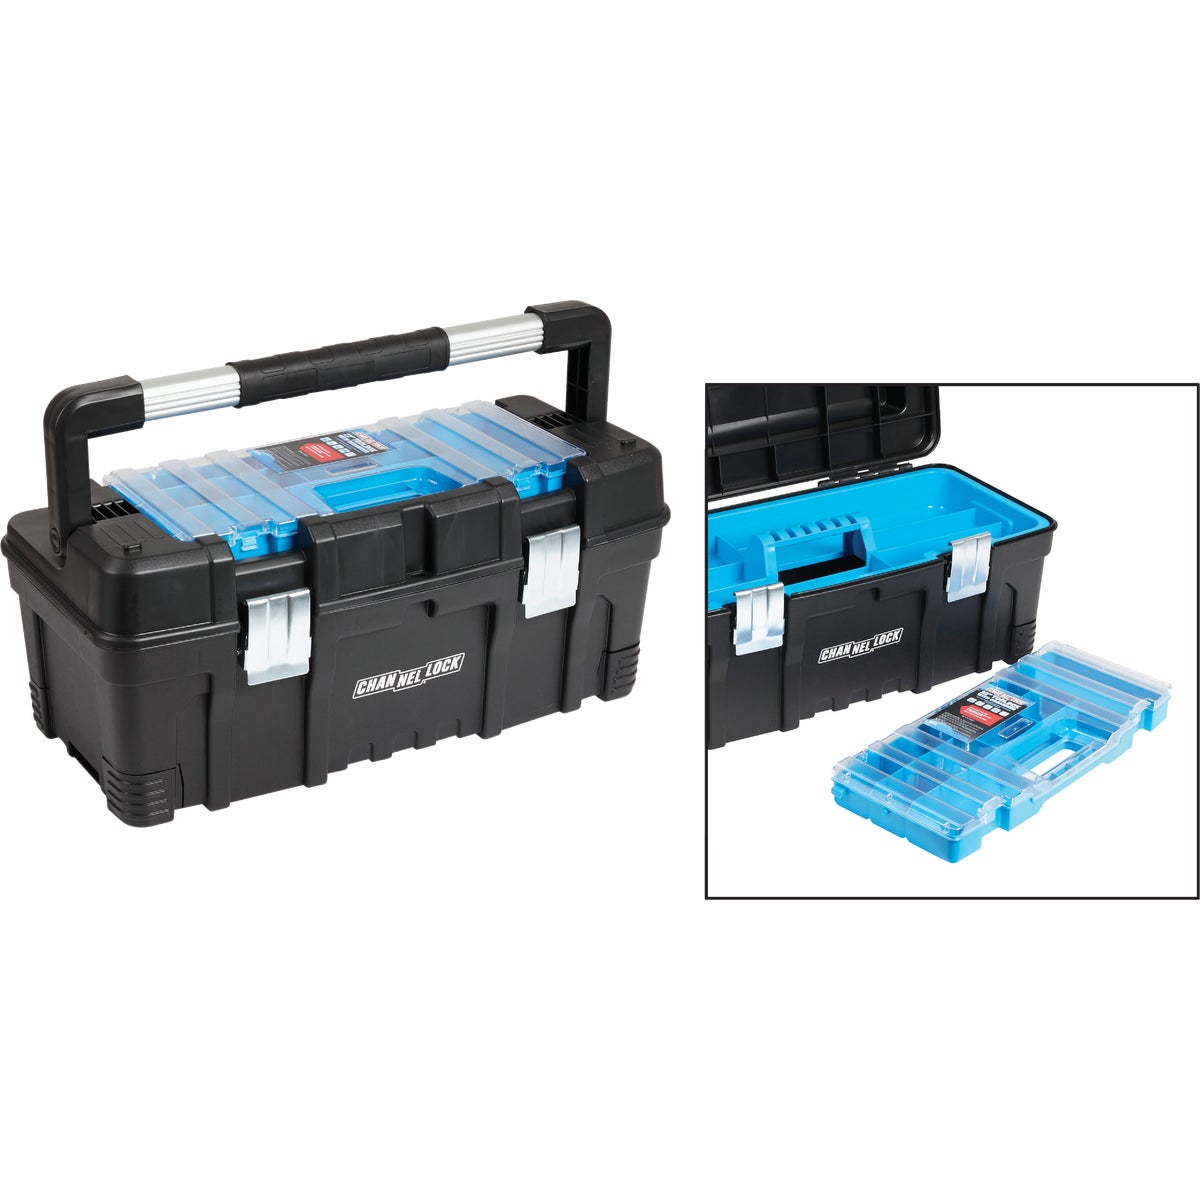 Channellock 22 In. Toolbox with Organizer